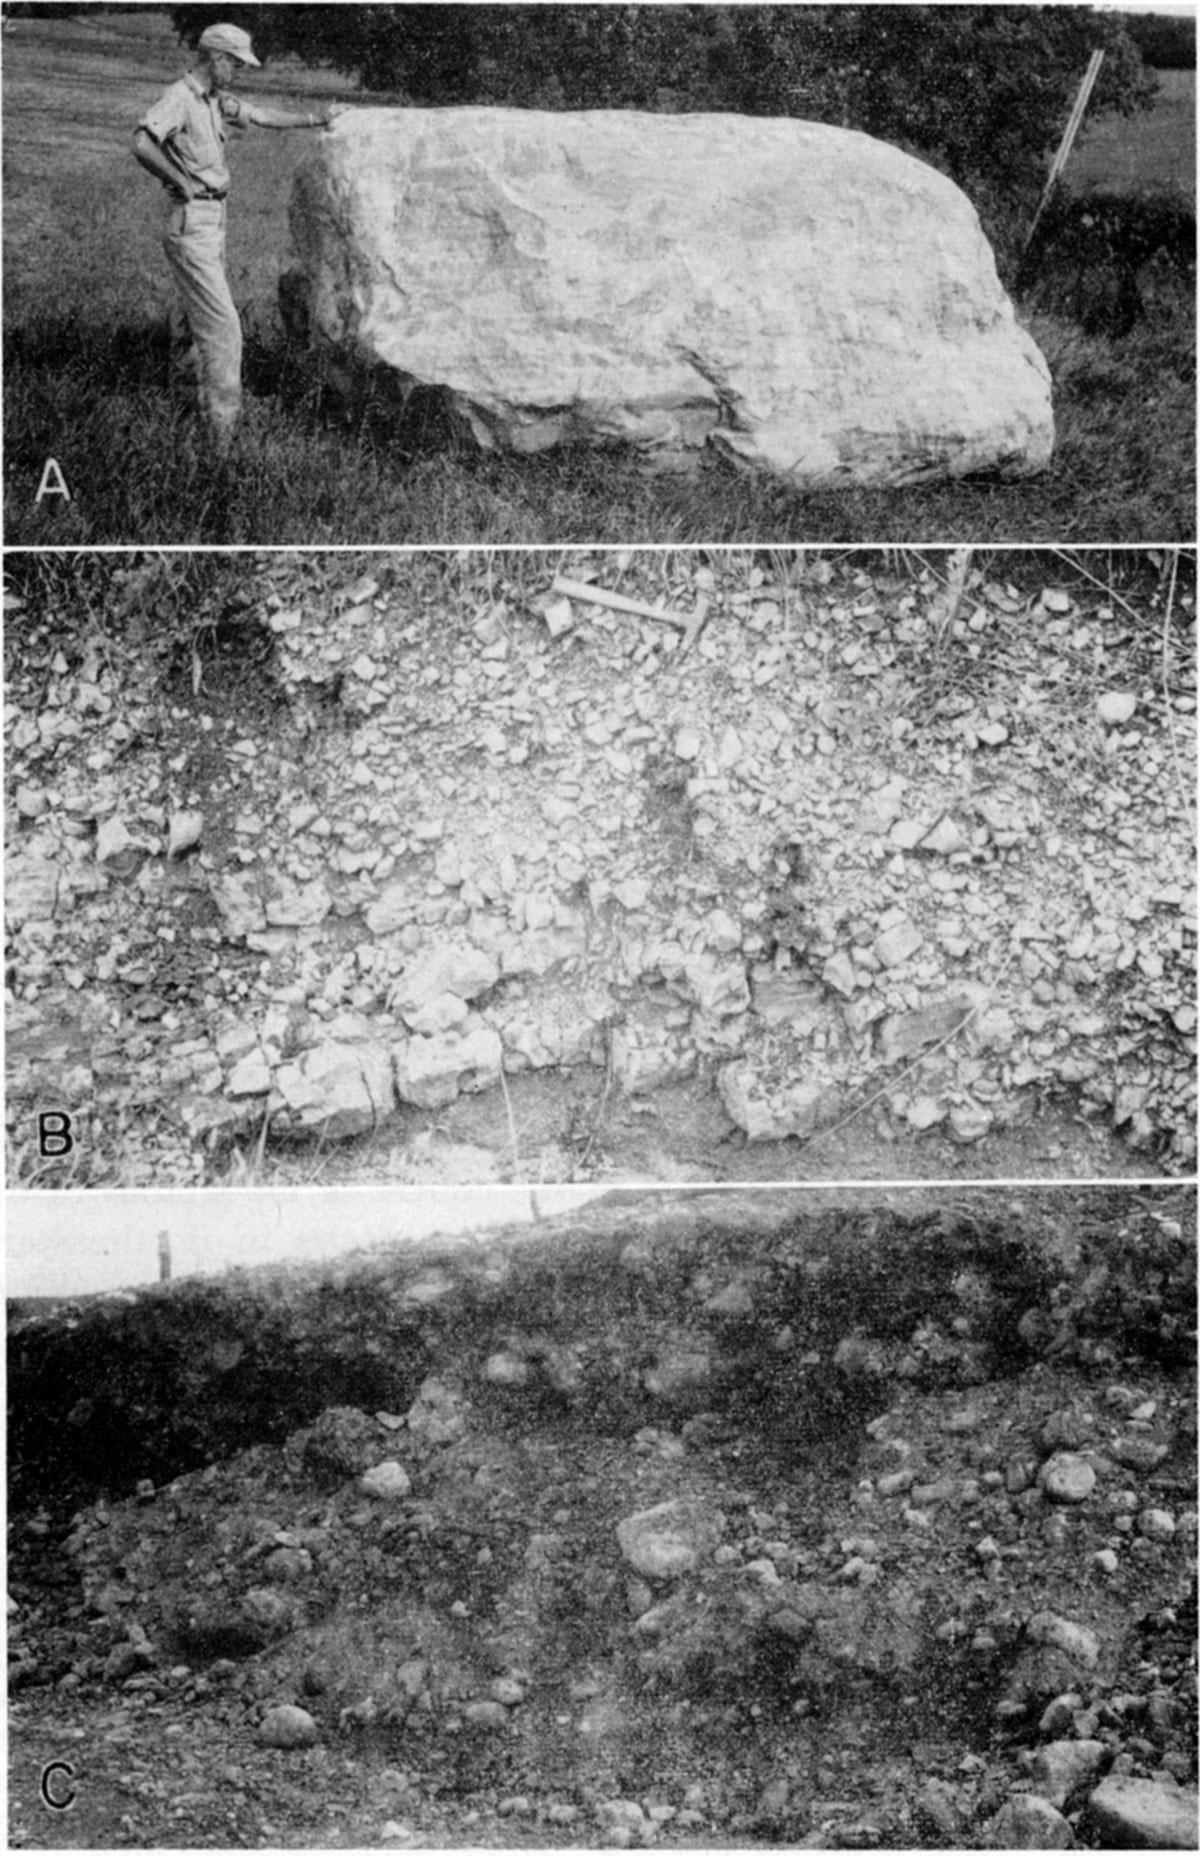 Three black and white photo; top is of boulder, 5 feet tall and 12-15 feet across; middle is of rubble in outcrop; bottom is of Kansan outwash (Meade formation) outcrop.